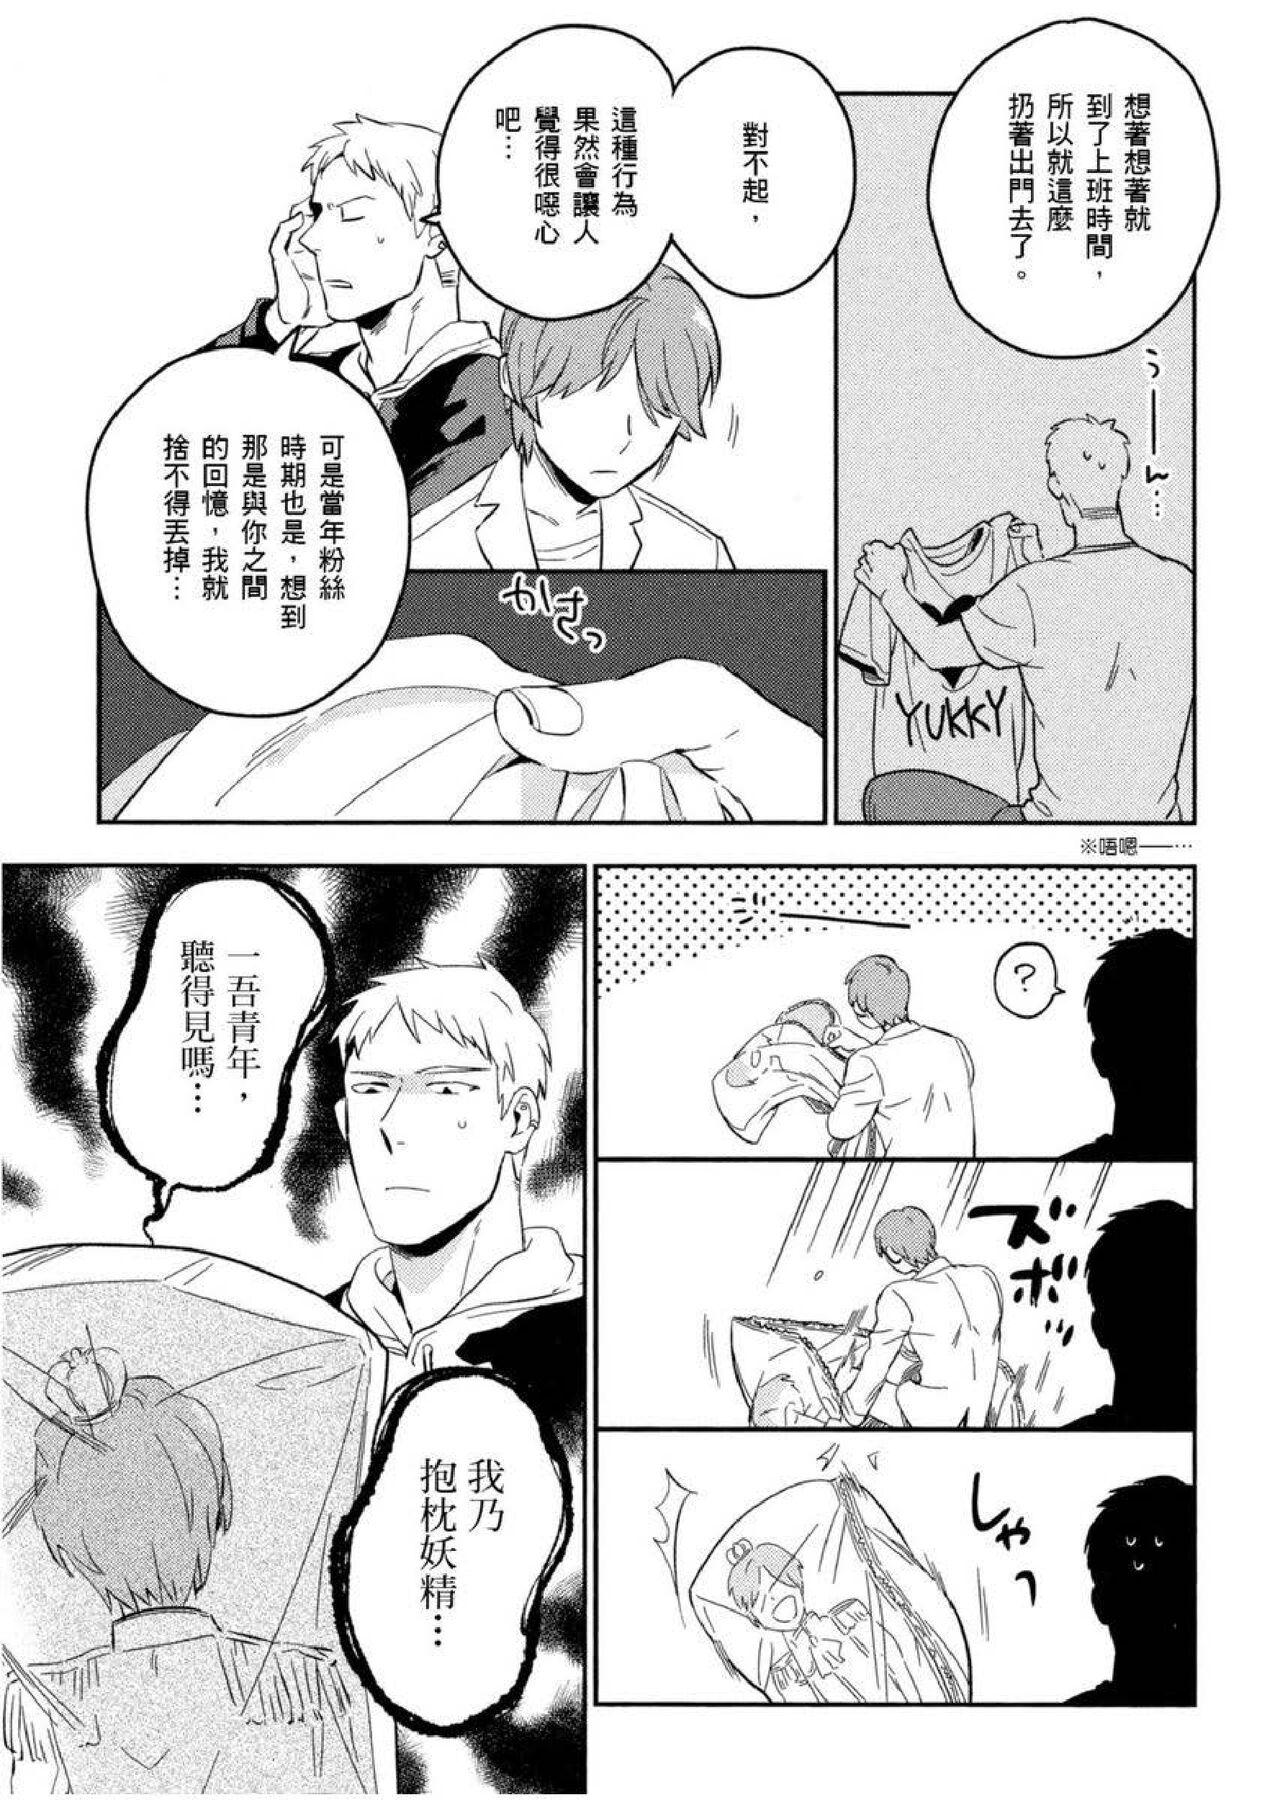 Rebolando Soine Lovers | 陪睡Lovers Cei - Page 192